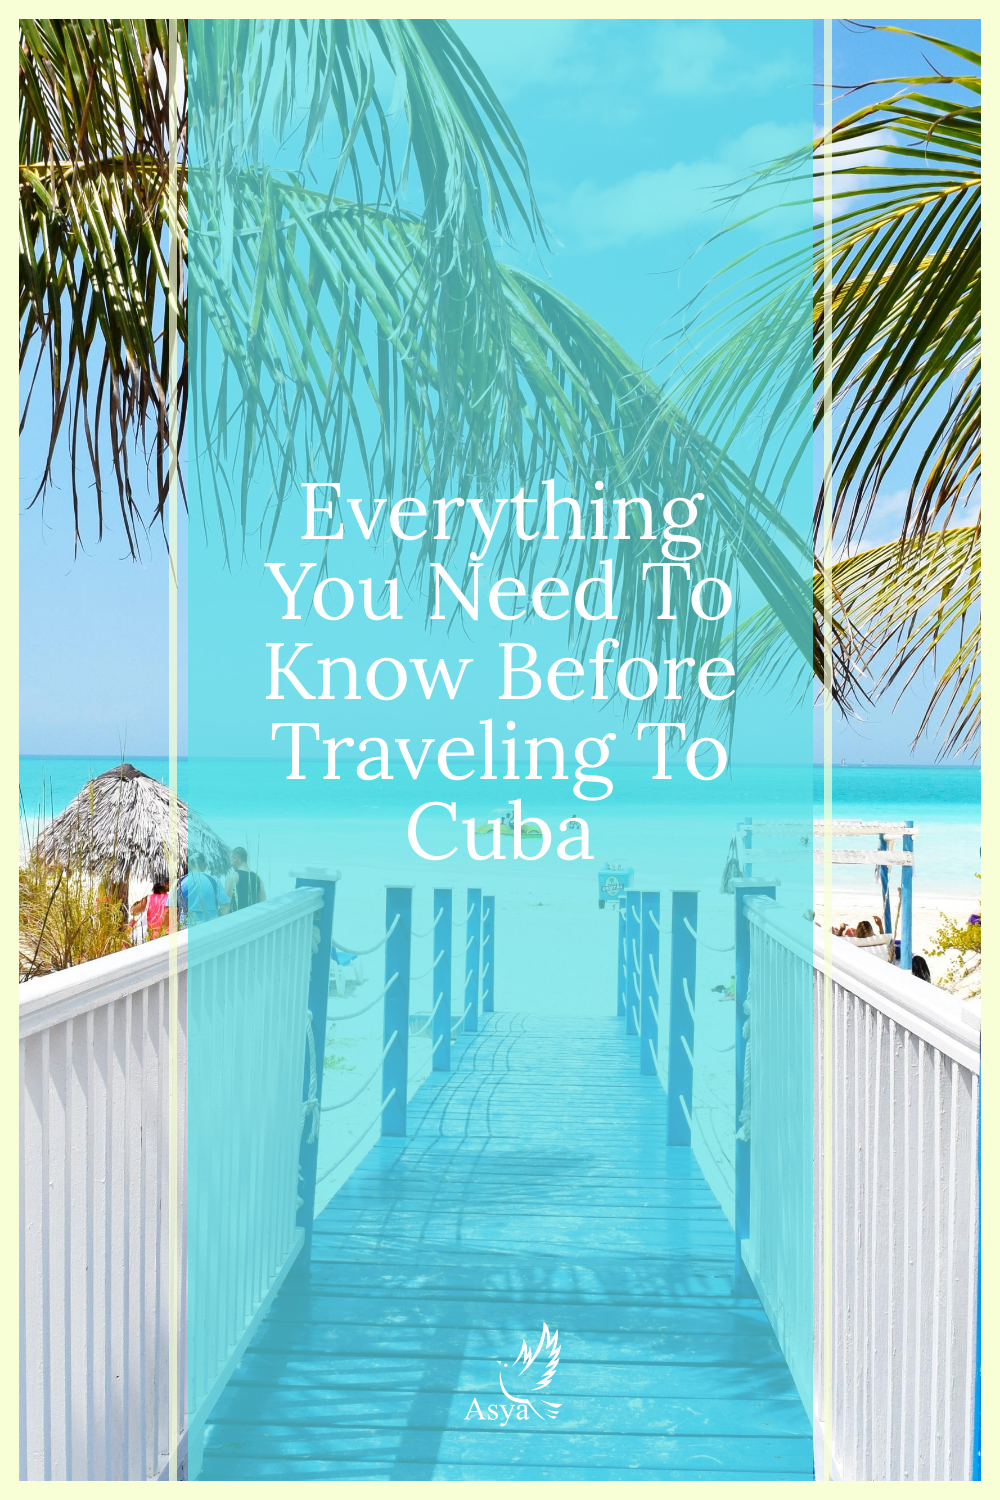 Everything You Need to Know About Traveling to Cuba by Asya.jpg